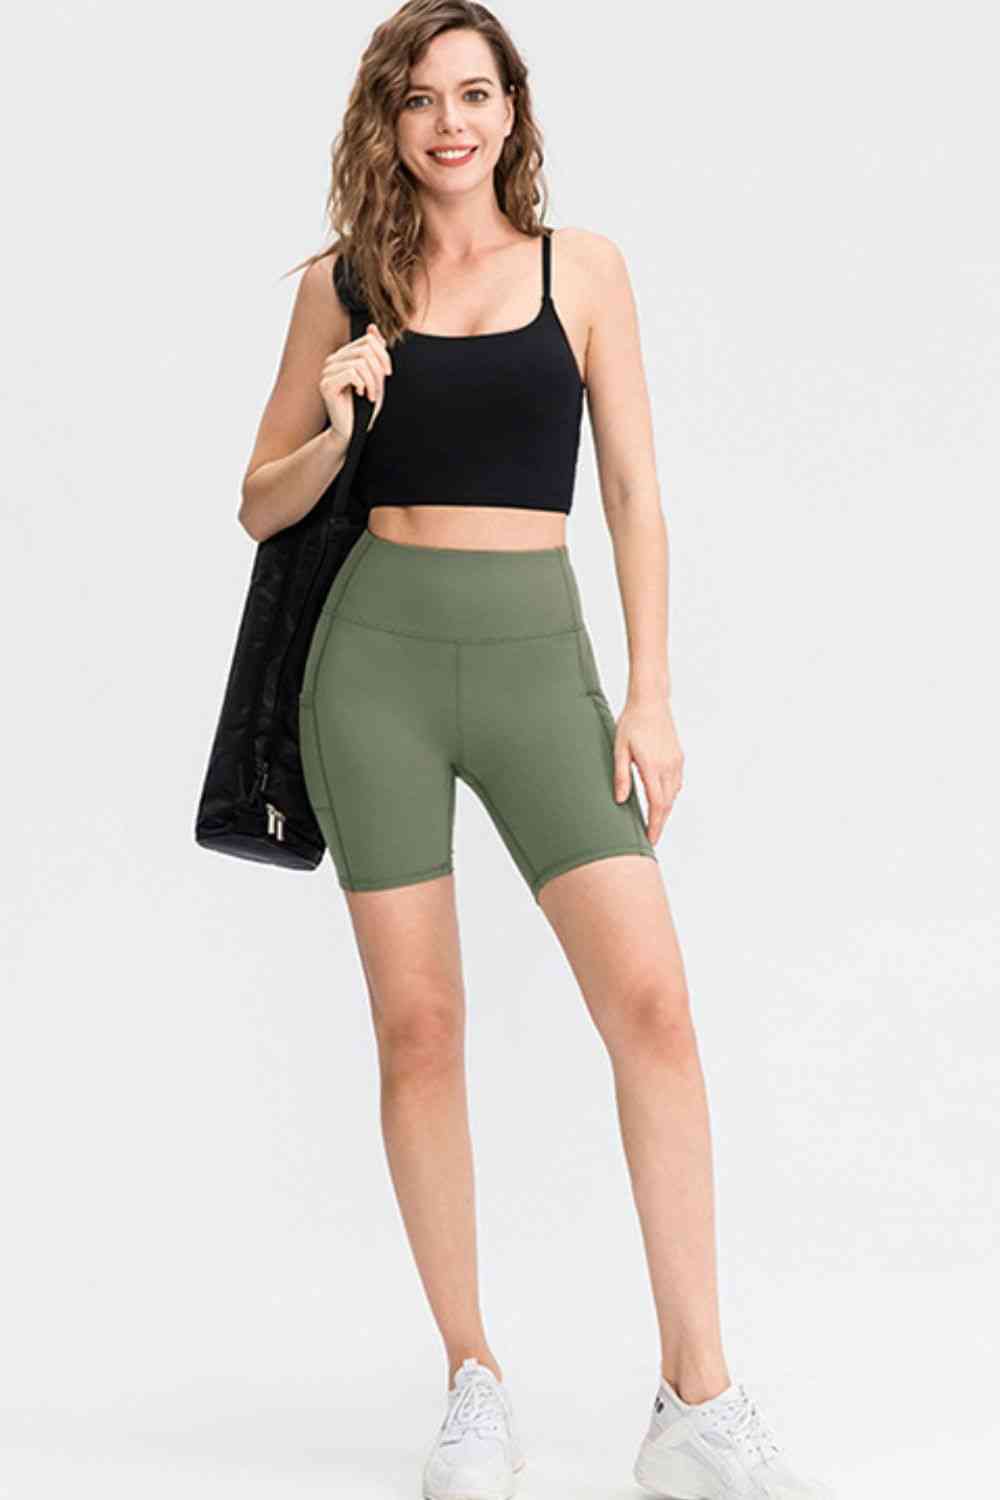 Sport Short with Pockets - Army Green Wide Waistband